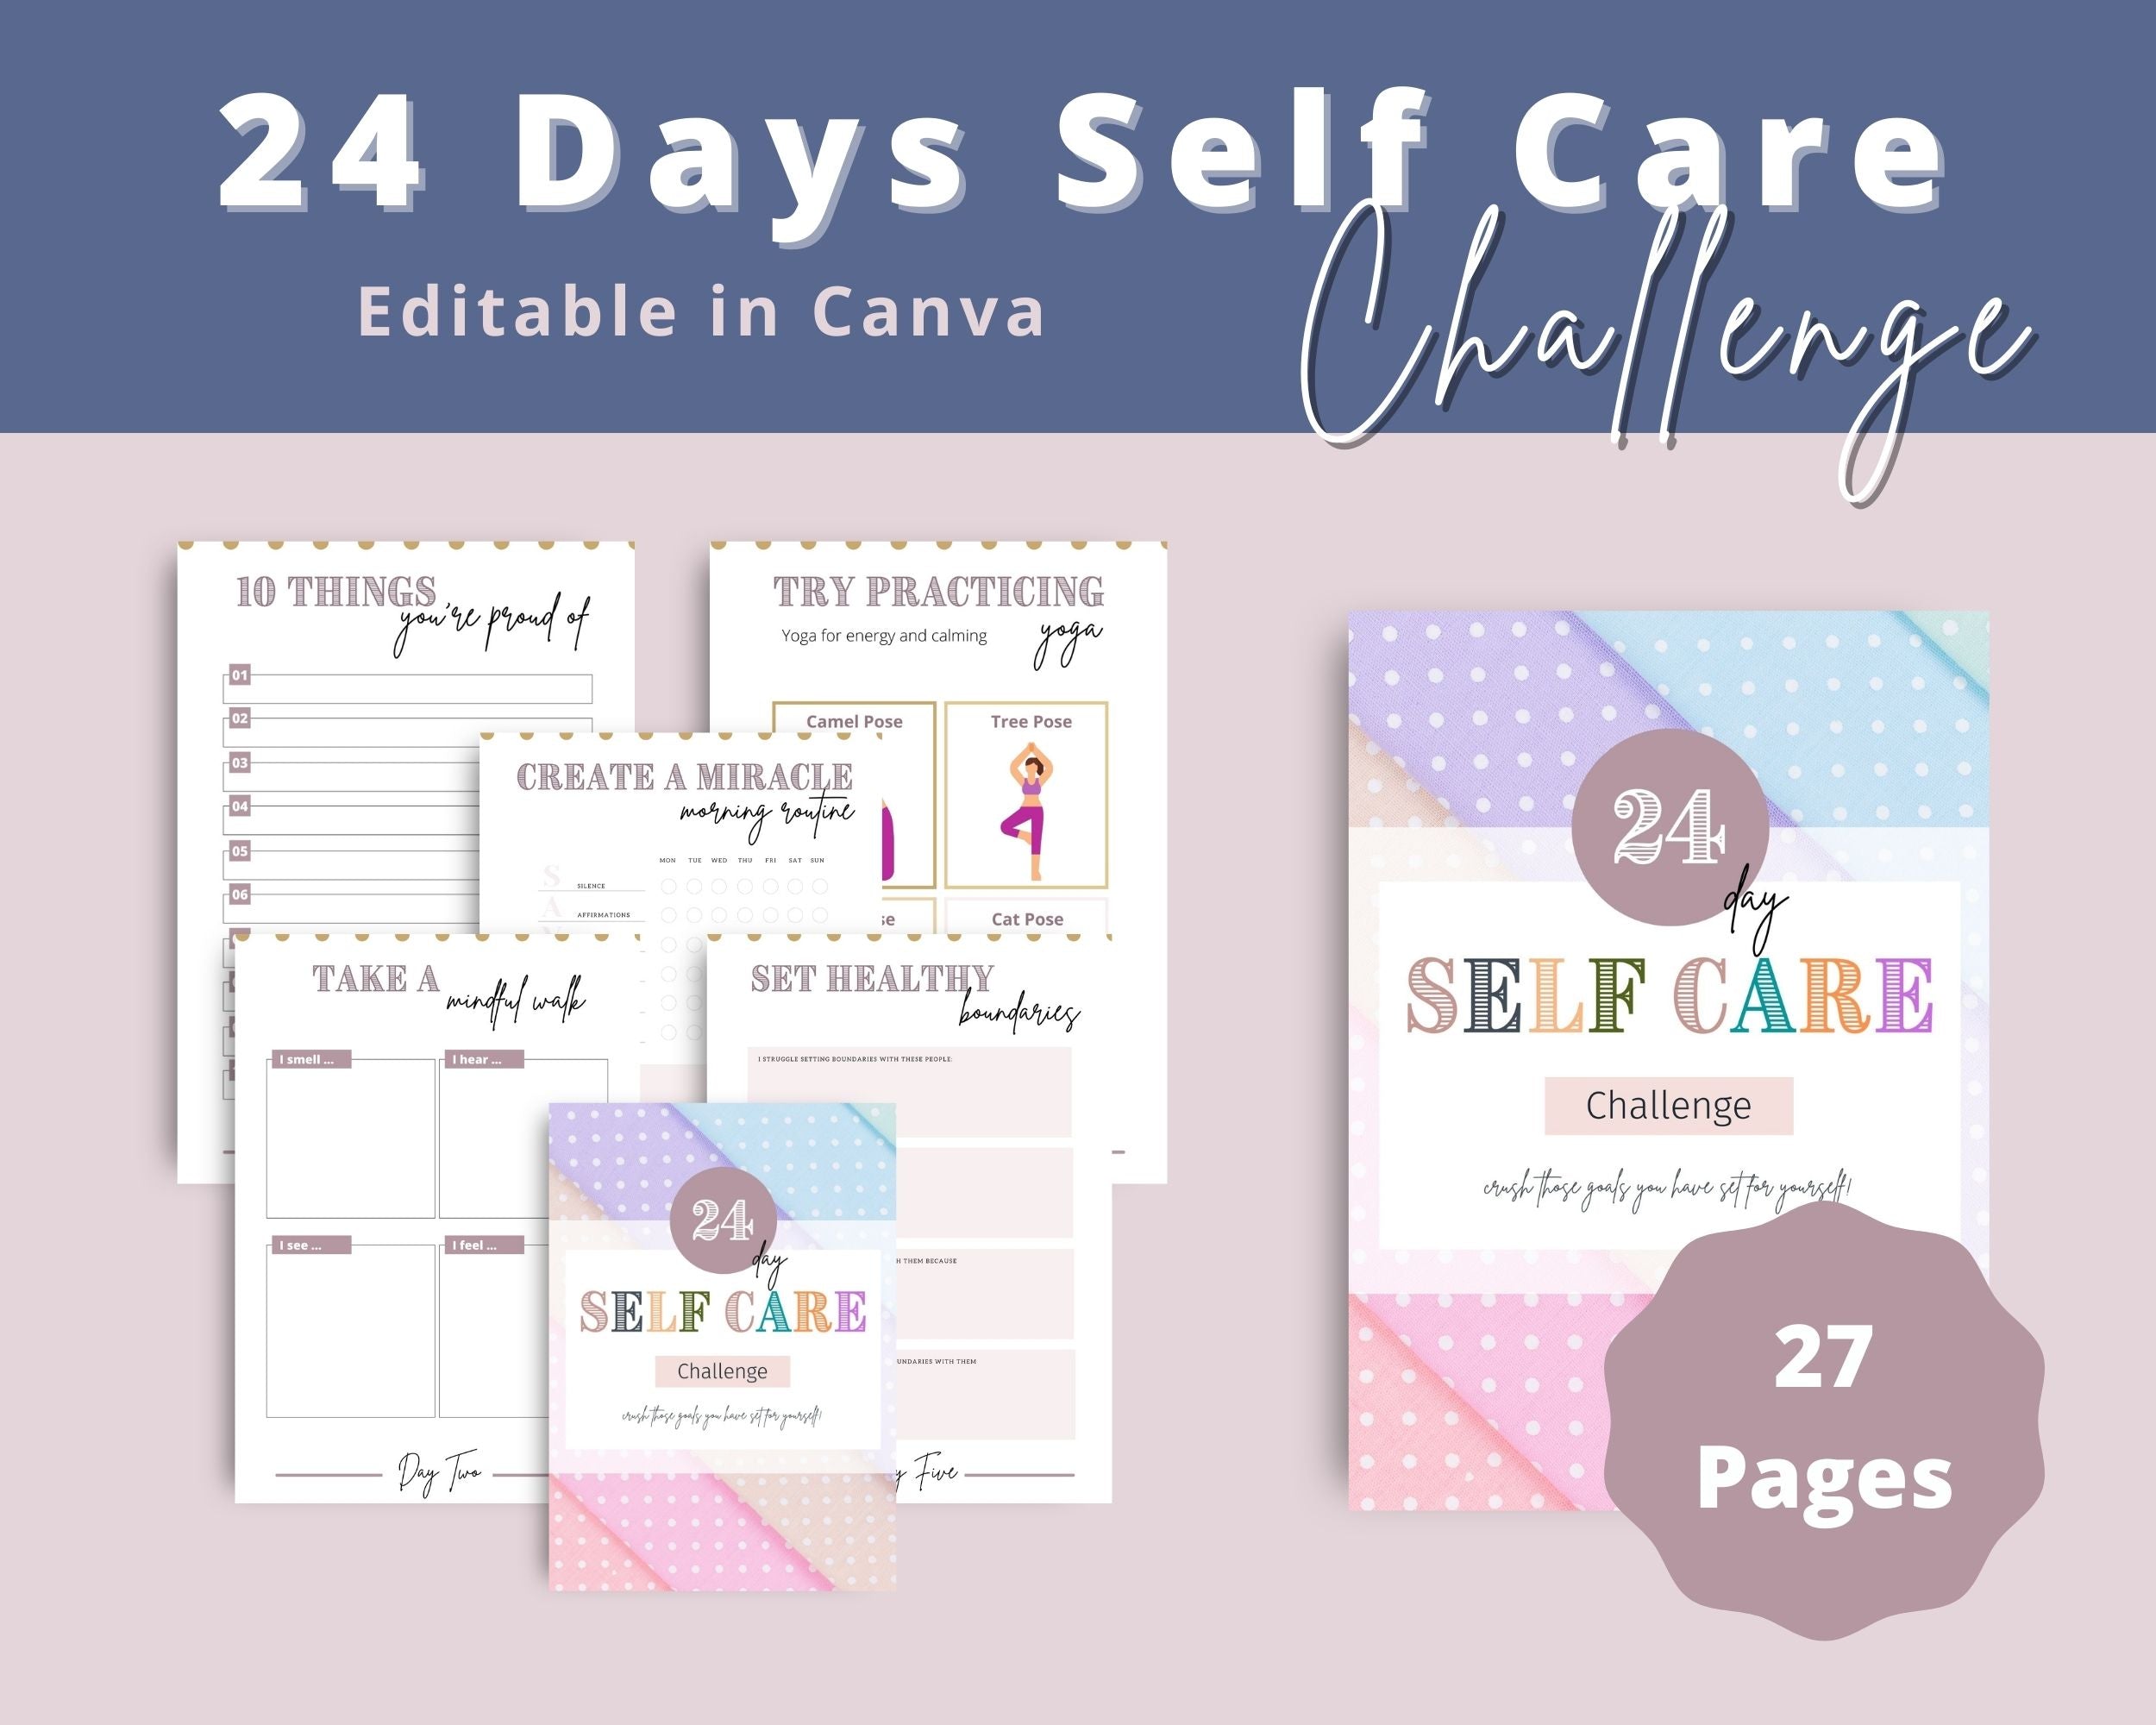 24 Days Self Care Challenge | Editable Canva Template A4 Size